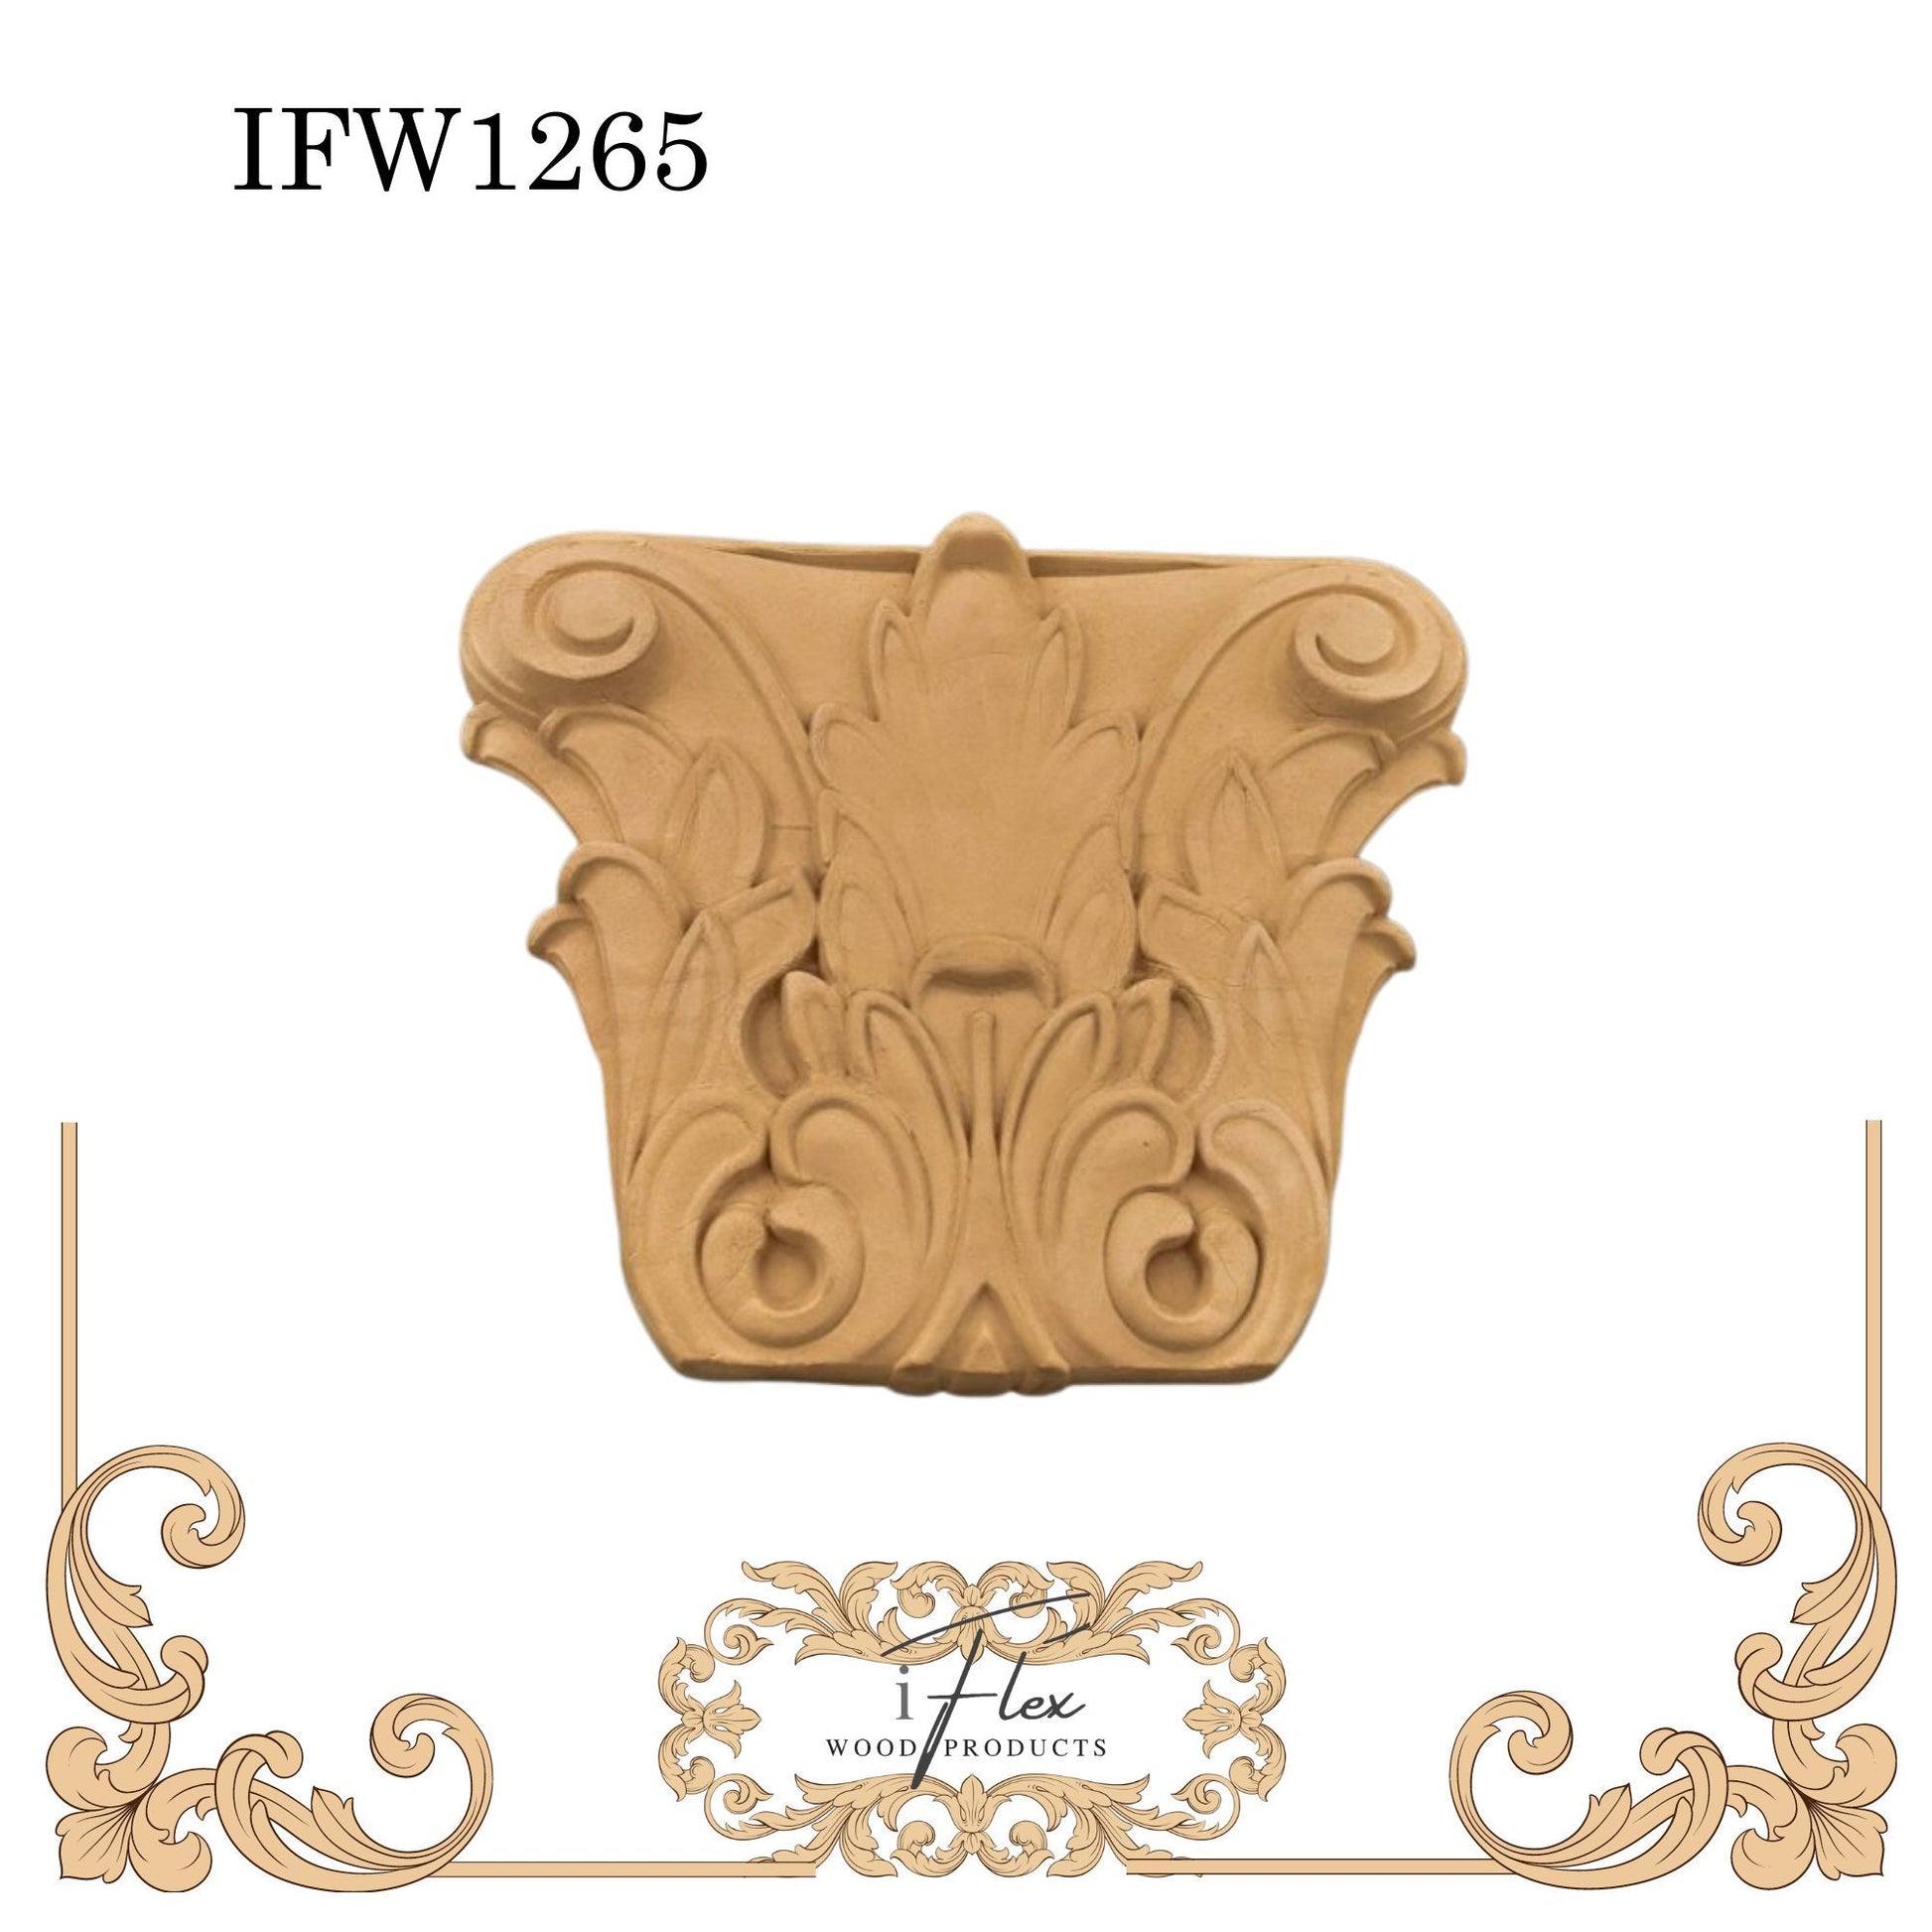 IFW 1265 iFlex Wood Products, bendable mouldings, flexible, wooden appliques, plaque, architectural piece